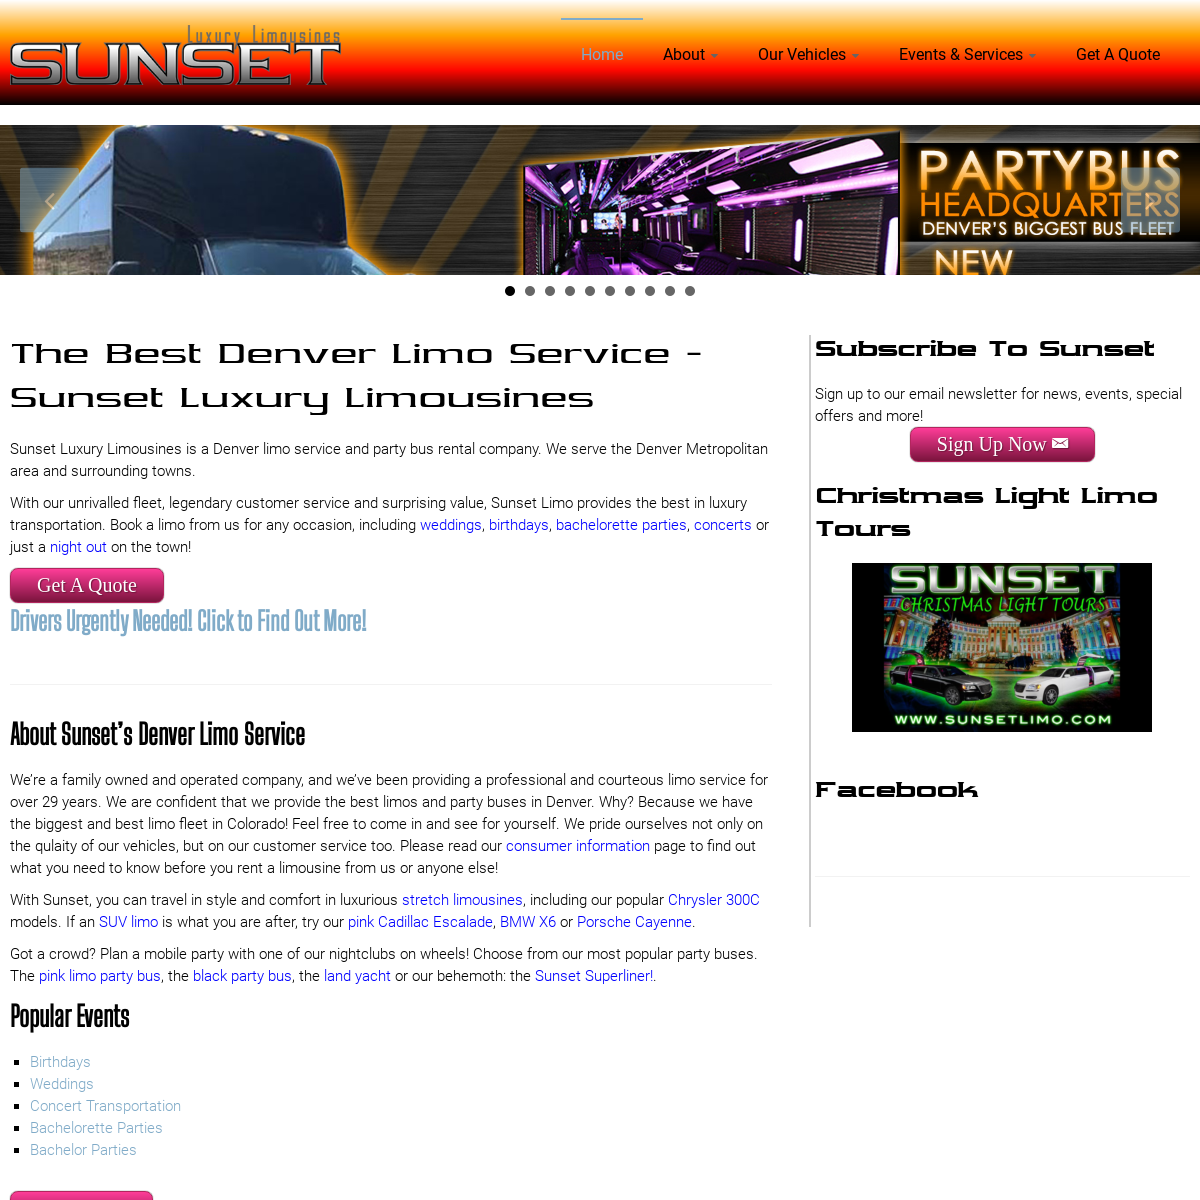 A complete backup of sunsetlimo.com